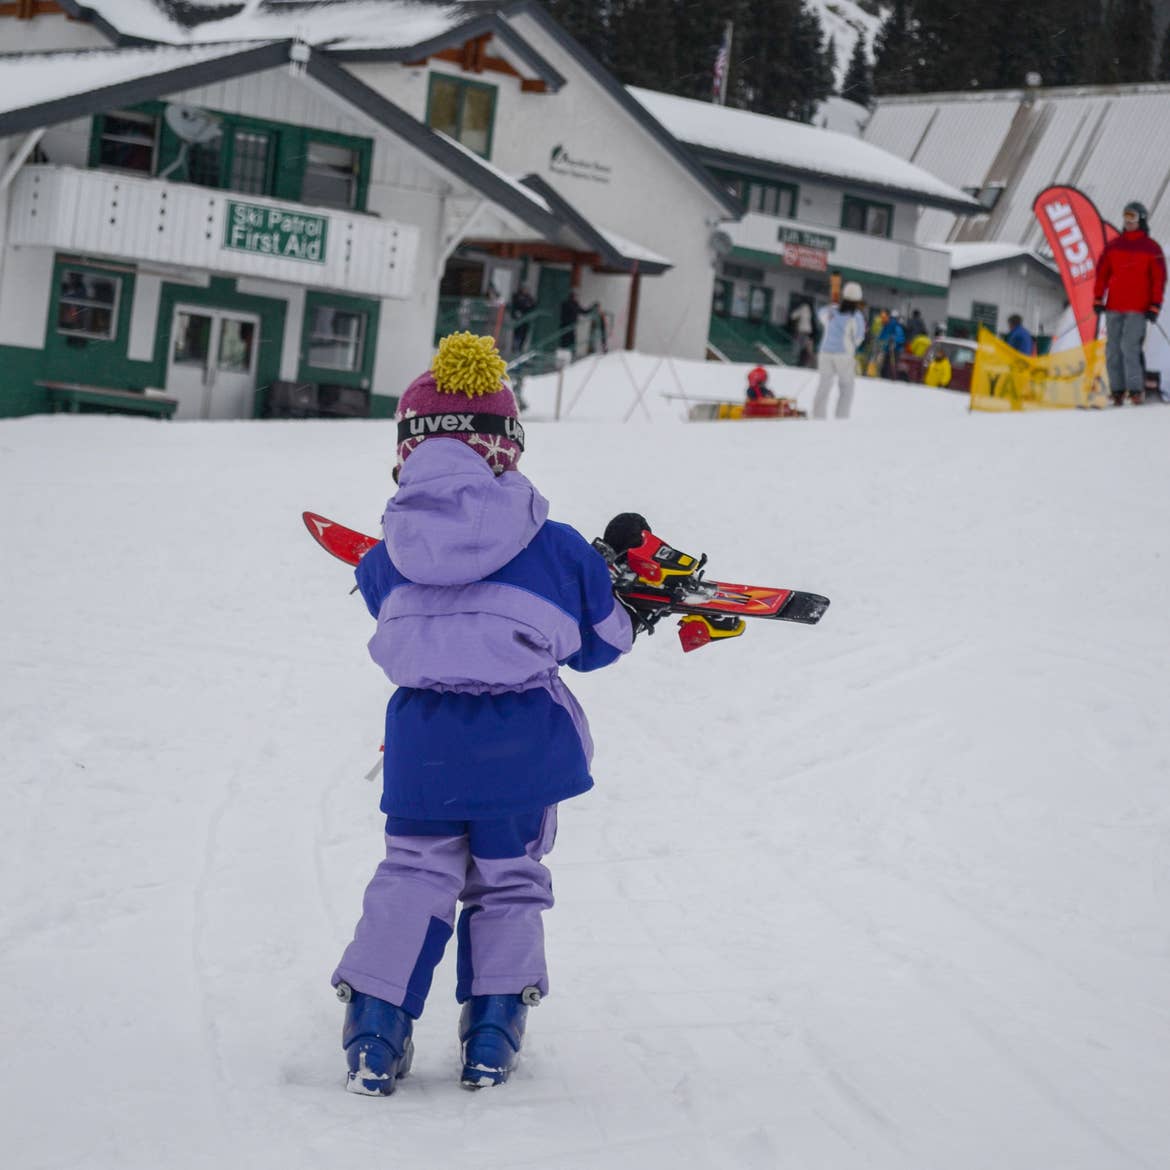 Jessica's daughter carries her skis to the slopes.